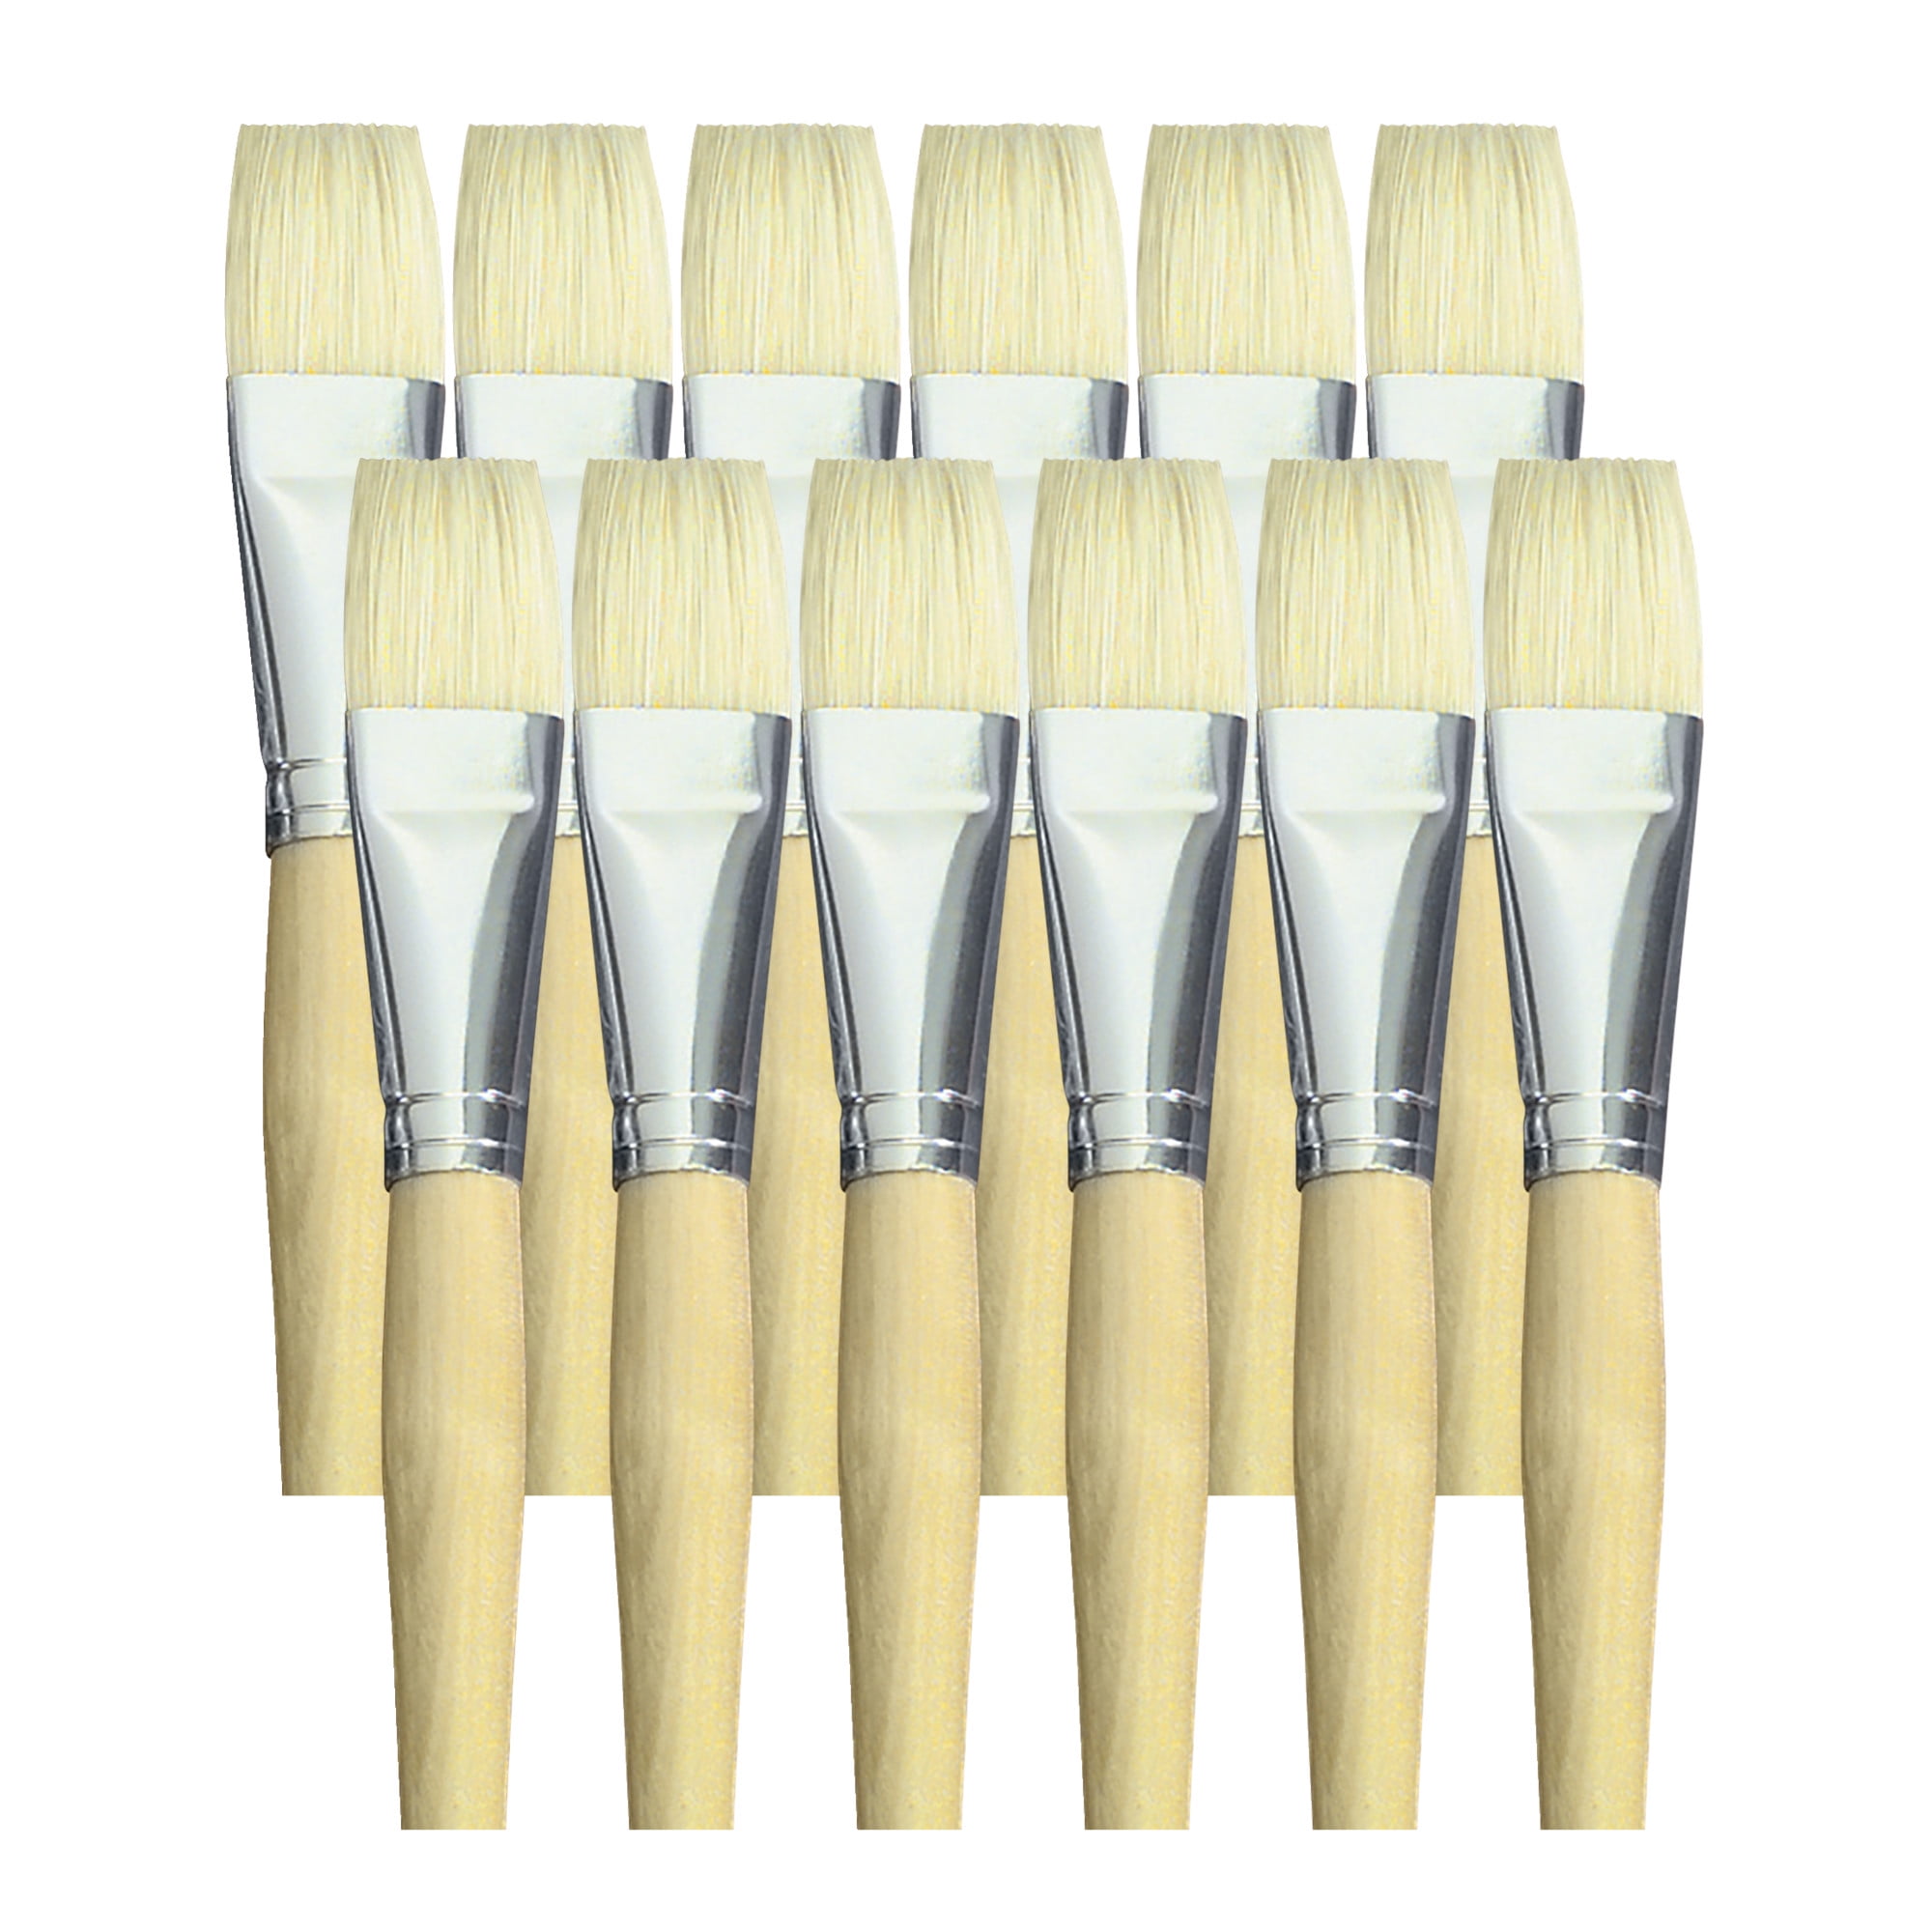 Sax White Bristle Paint Brushes With Short Wooden Handles, Flat